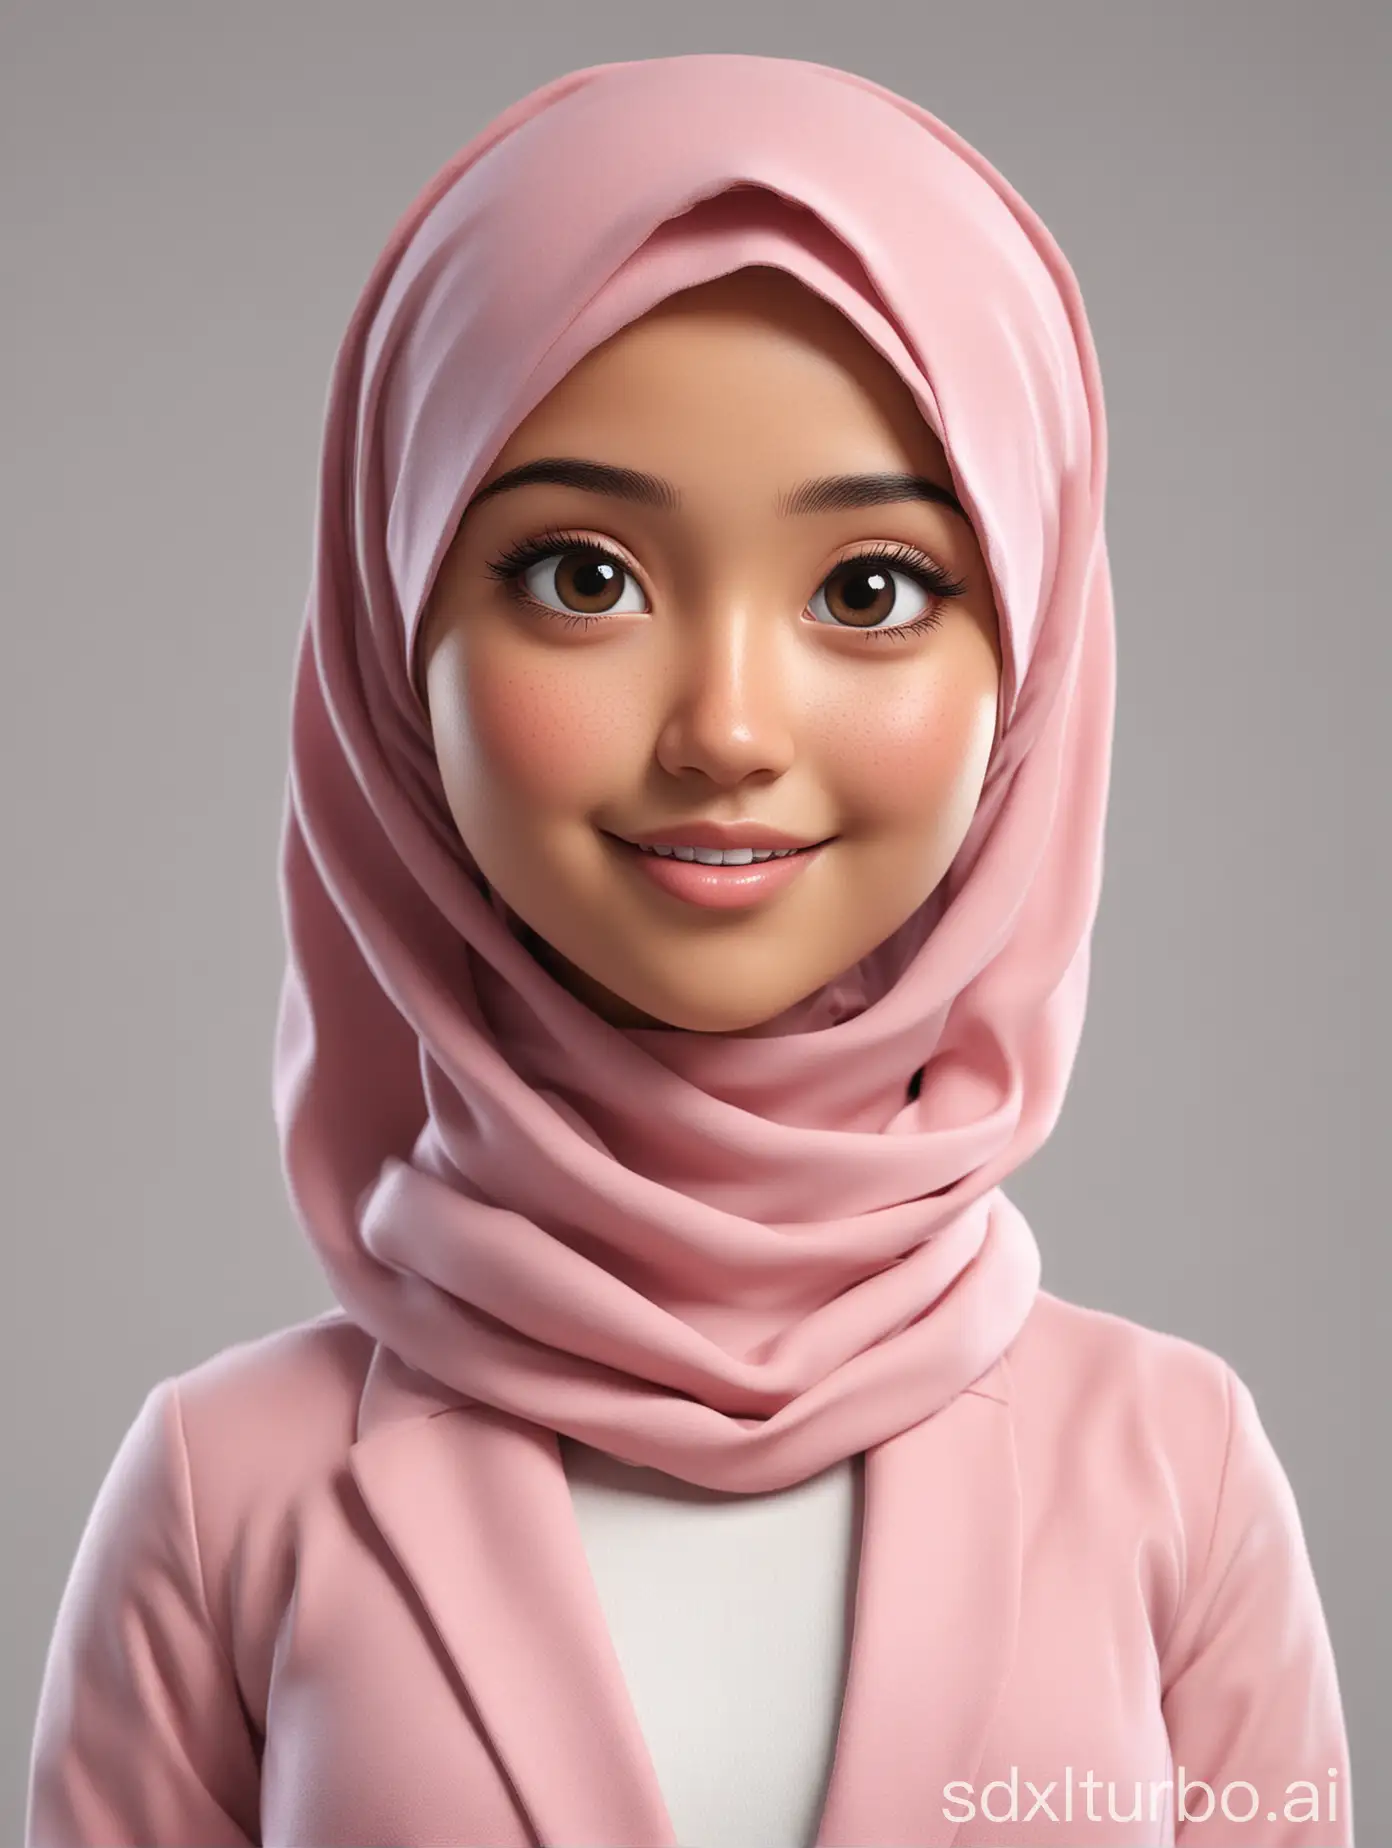 Create a full 3D cartoon style body with a big head. an indonesian girl. slightly round eyes, clean white skin, thin sweet smile. wearing a hijab, pink blazer, white undershirt, body position clearly visible. The background is solid white. Use soft photography lighting, hair lighting, top lighting, side lighting. Highest quality photos, Uhd,16k